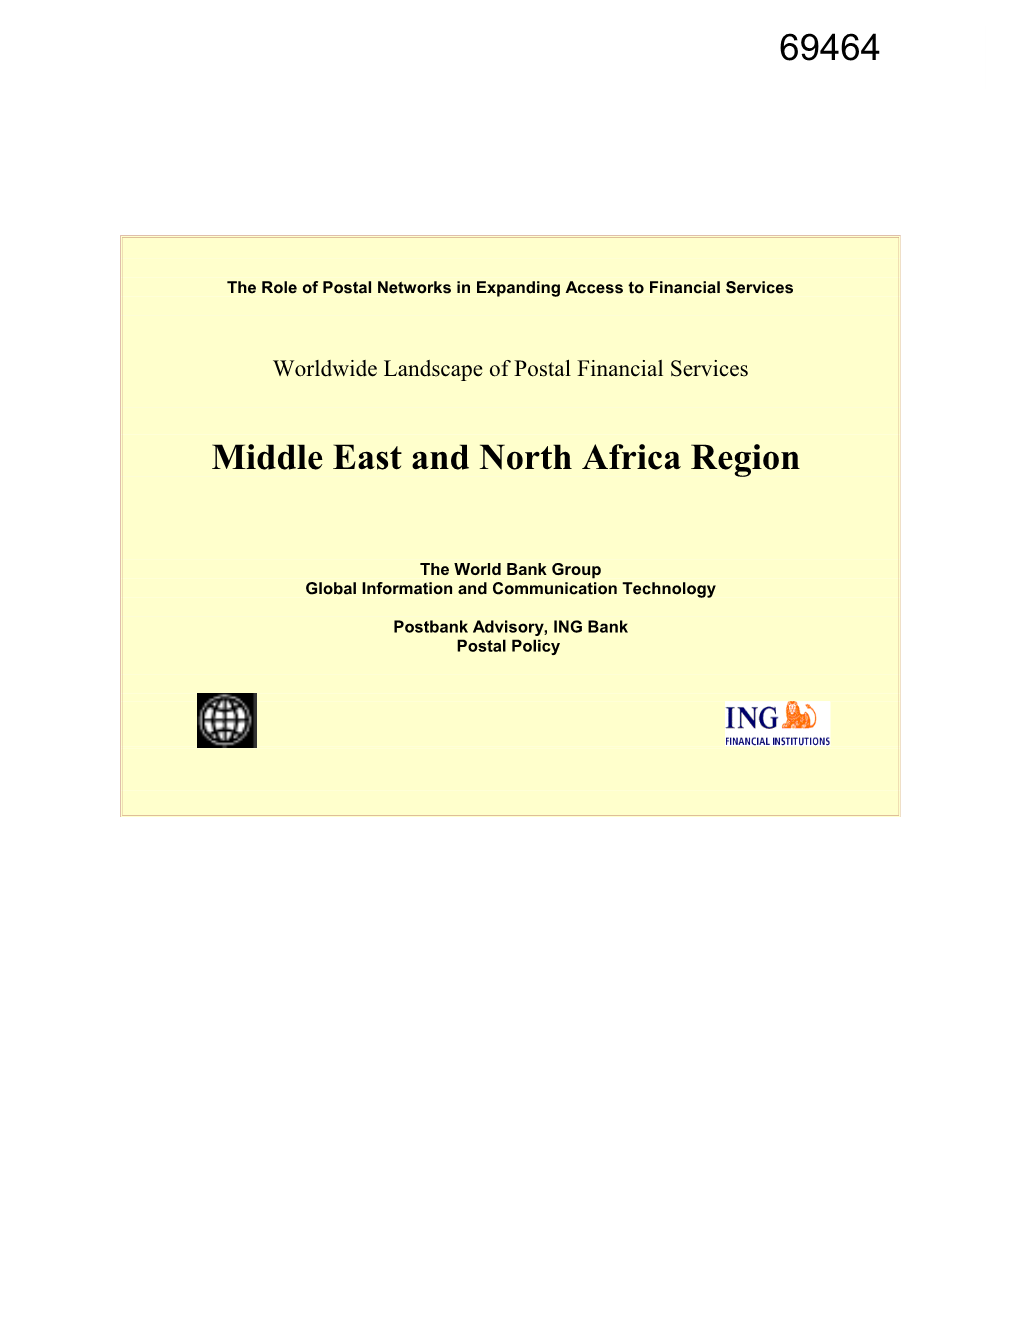 The Role of Postal Networks in Expanding Access to Financial Services s1